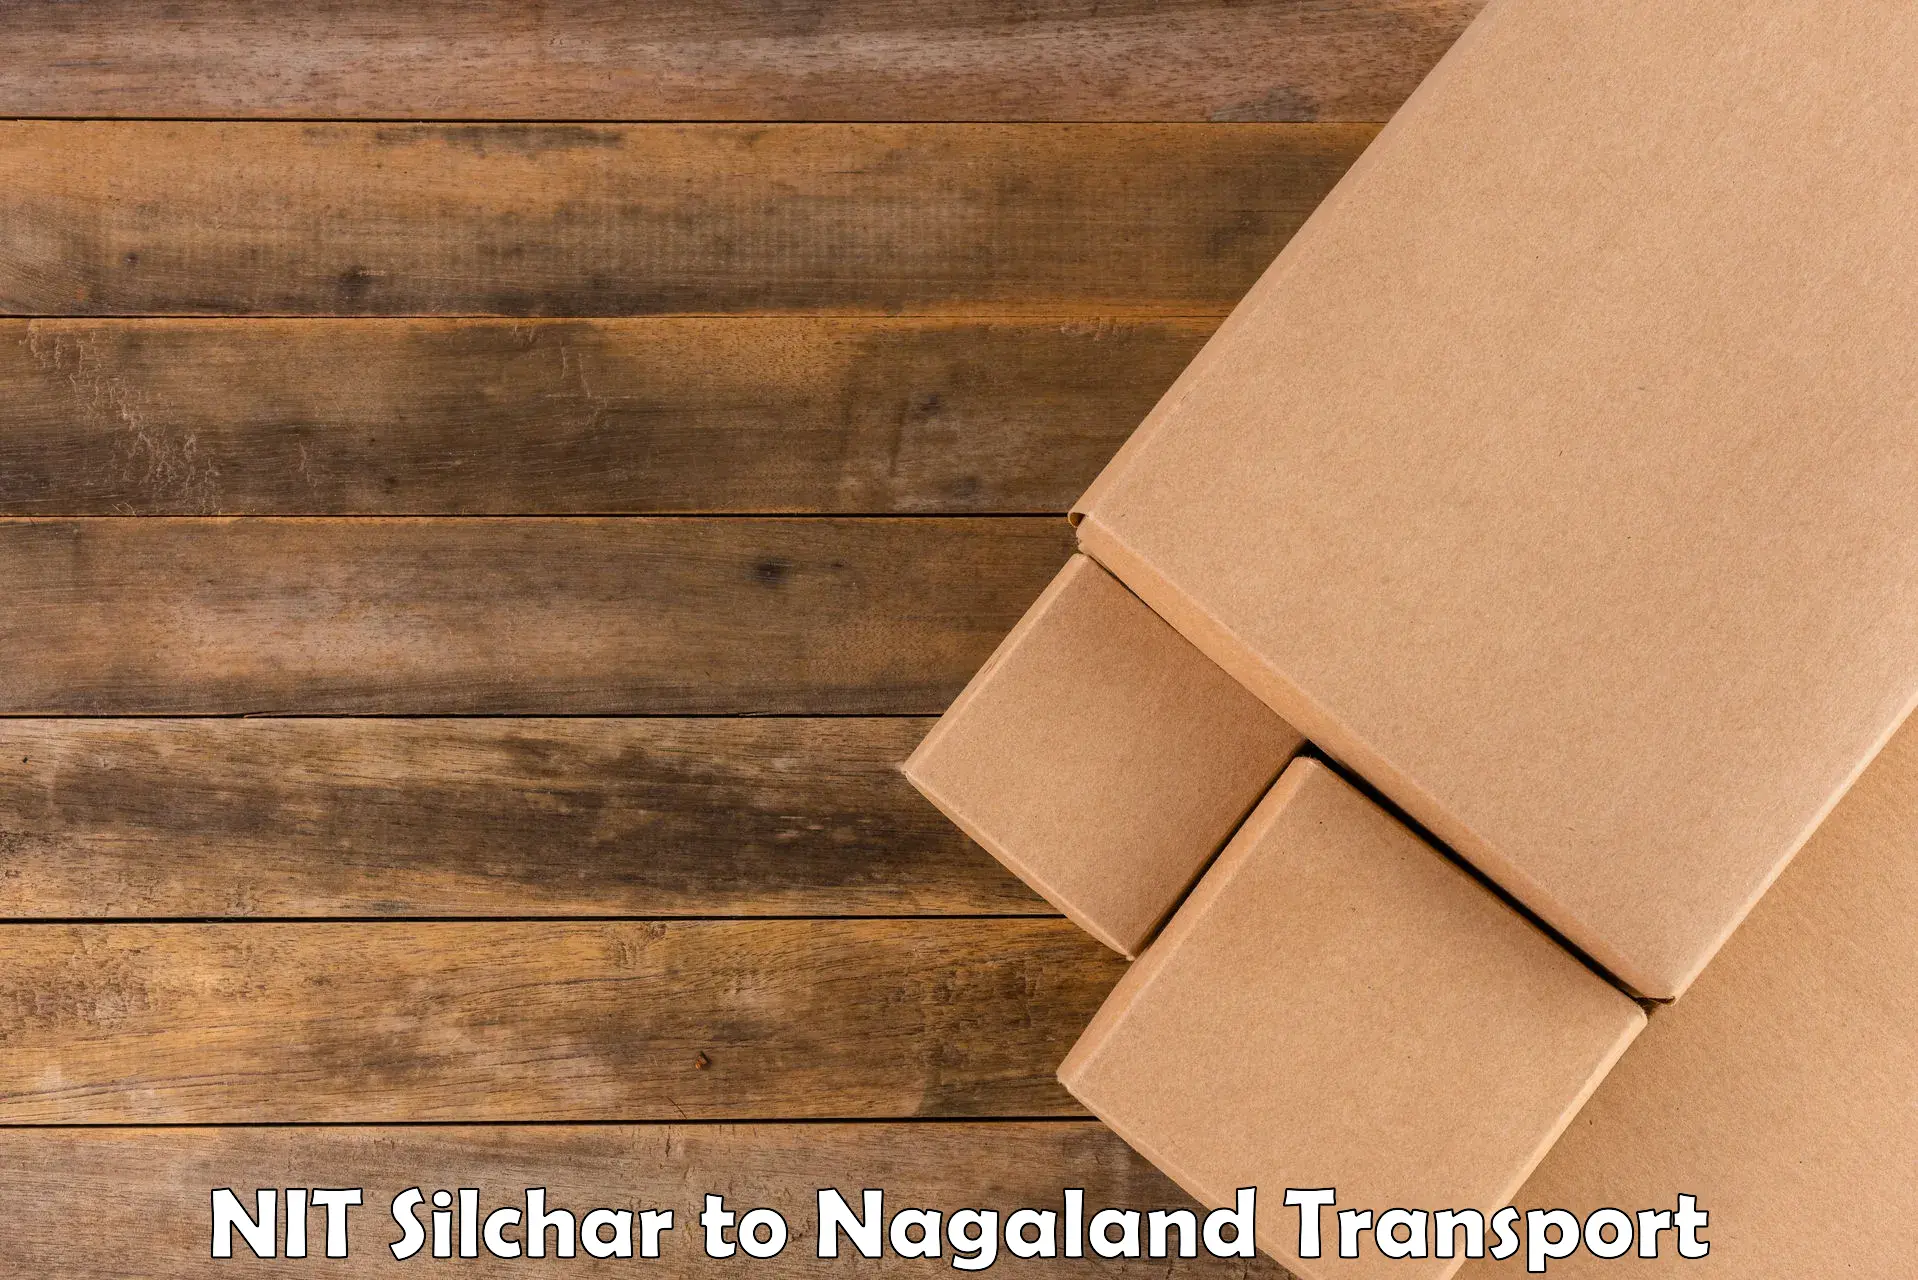 Goods delivery service NIT Silchar to Dimapur